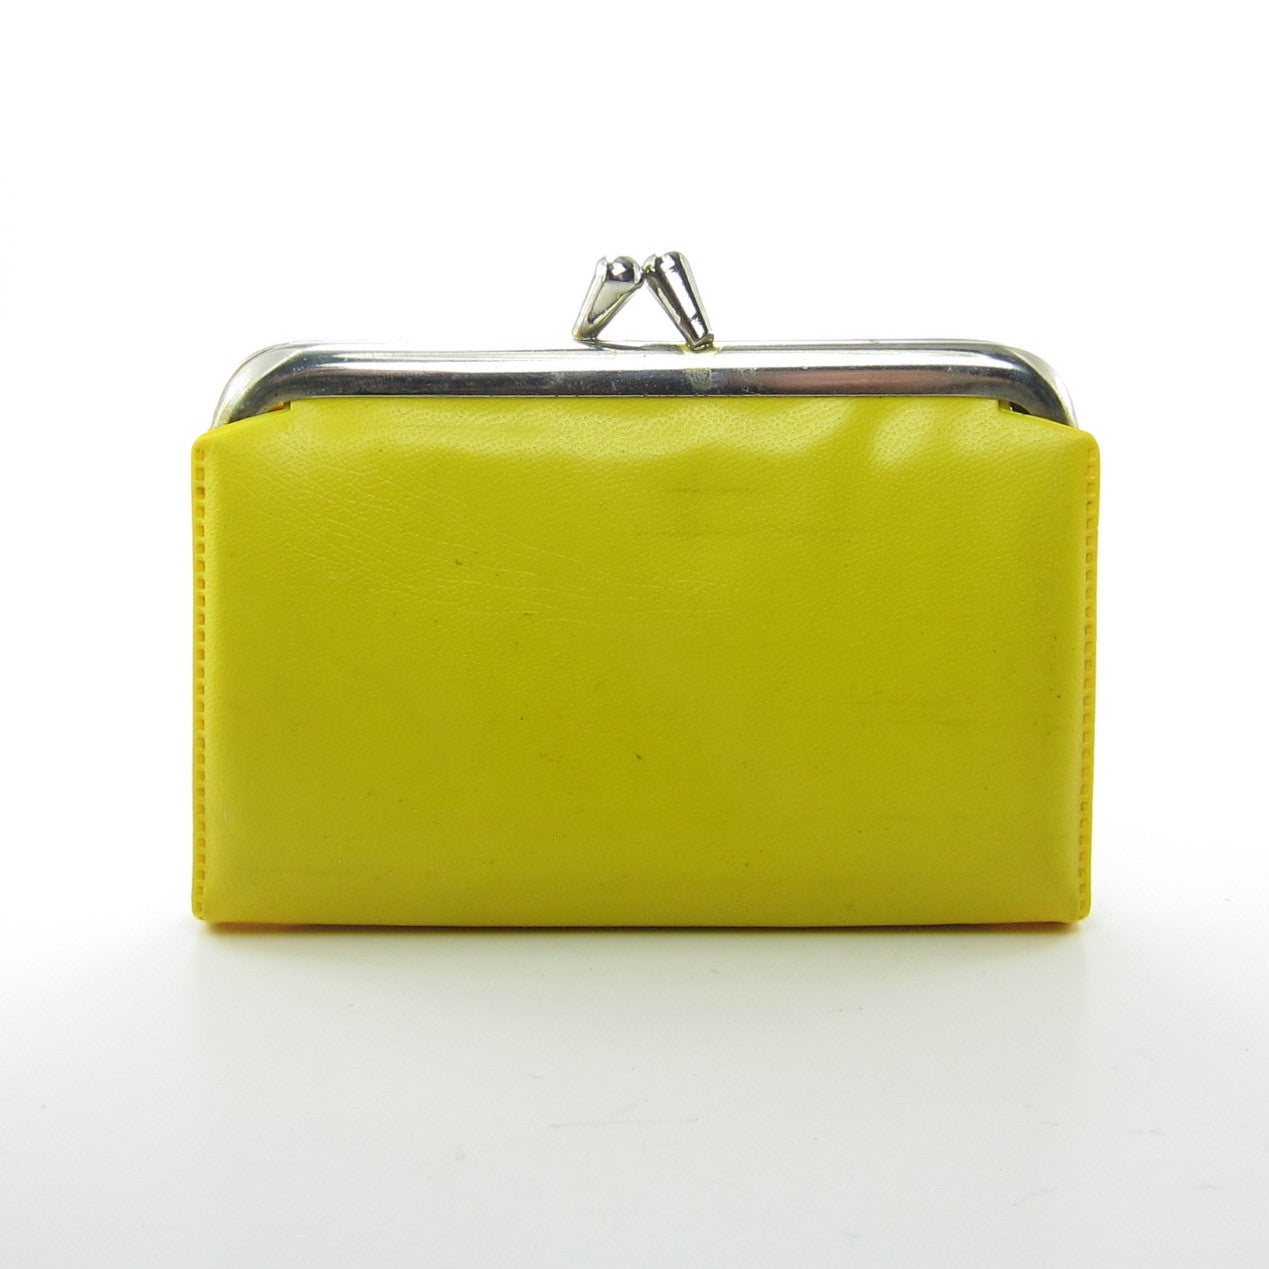 Vintage style kiss lock purse in genuine leather. Coin purse in yellow –  Handmade suede bags by Good Times Barcelona